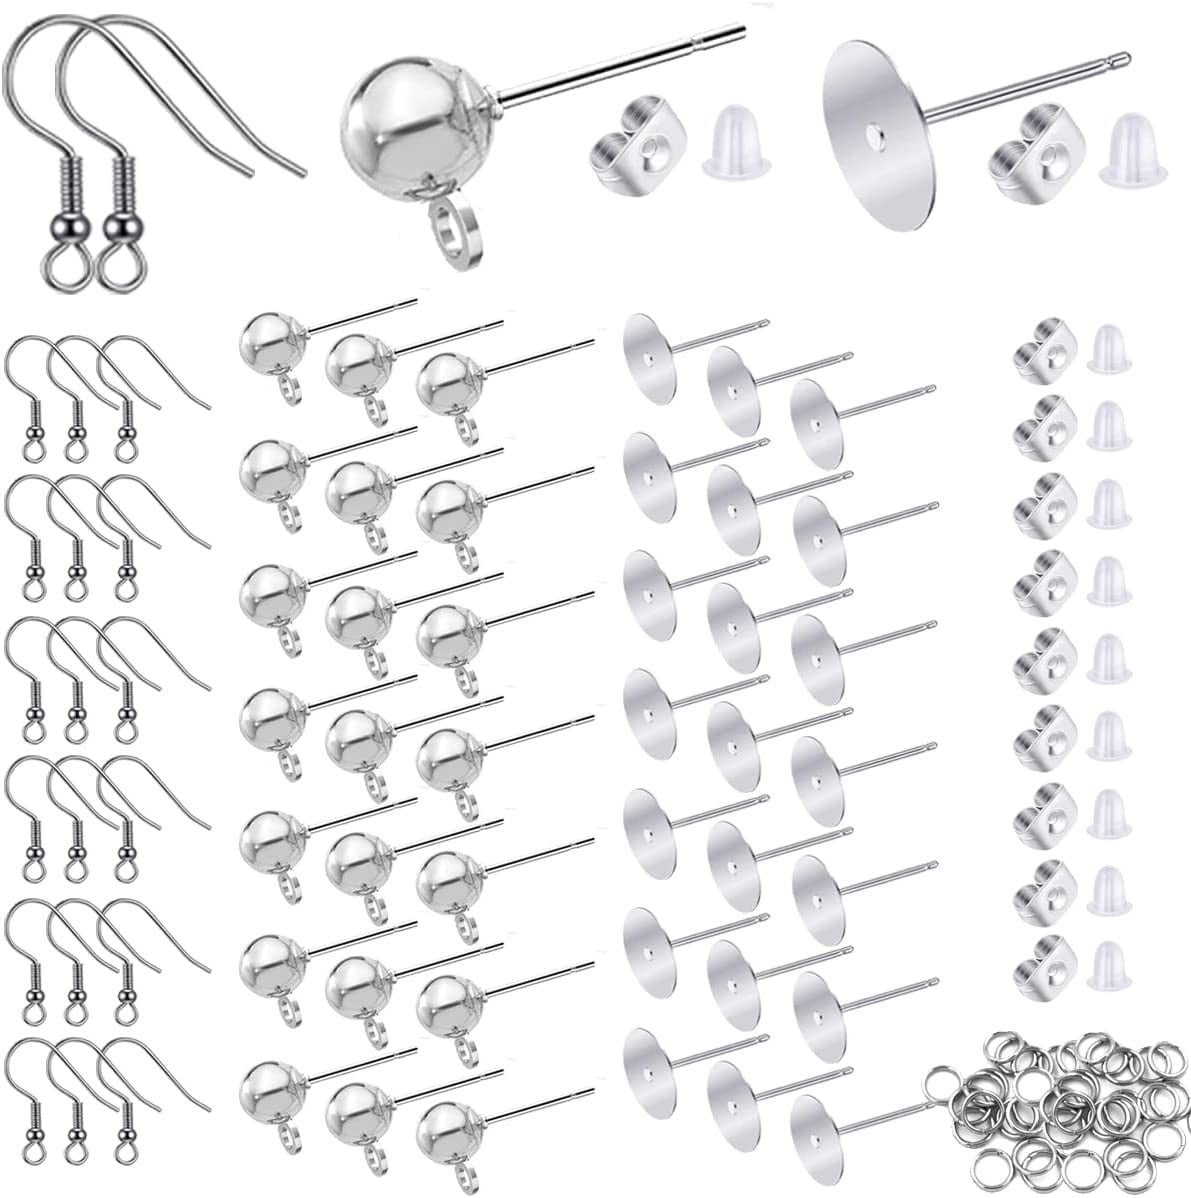 Incraftables Earring Making Kit (5 Colors). DIY Earring Kits for Jewelry  Making Supplies w/Hypoallergenic Earring Hooks, Backs, Display Cards, Bags